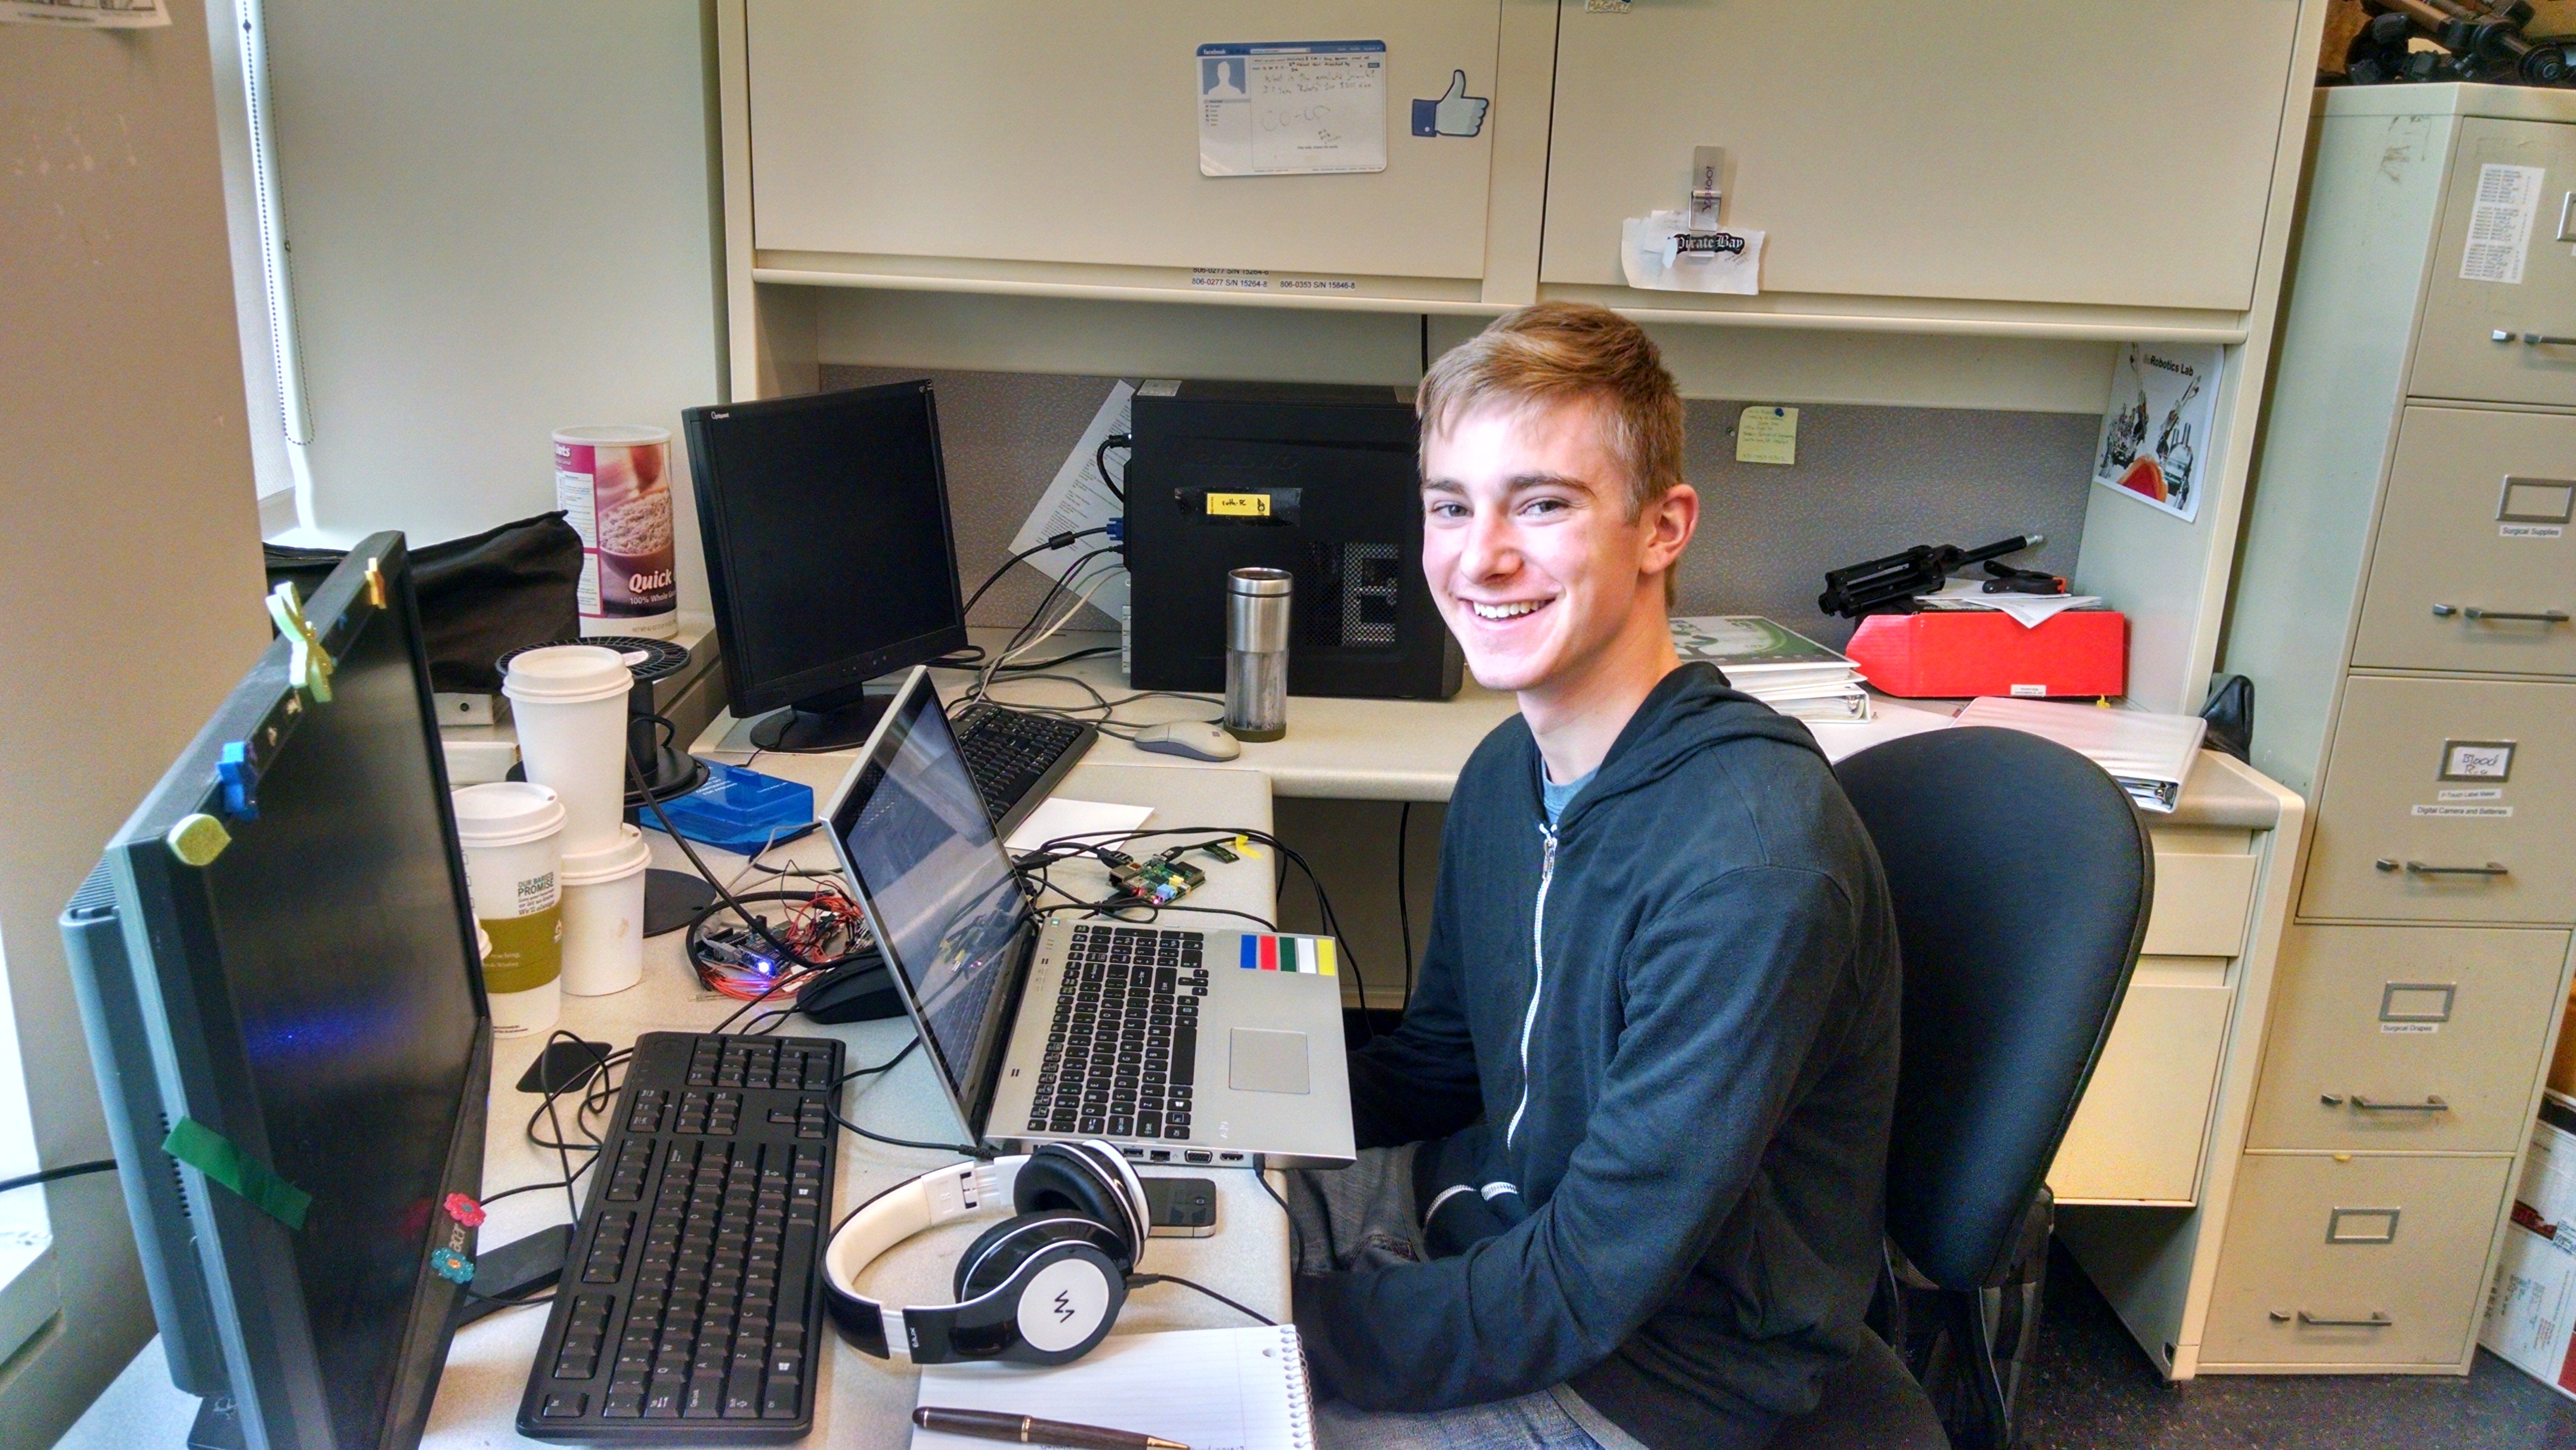 Ben Elliott, a senior at Mercer Island Highschool, volunteered this summer in the BRL to collaborate with Francisco Garcia to build sensory systems for lower-limb prosthetic users